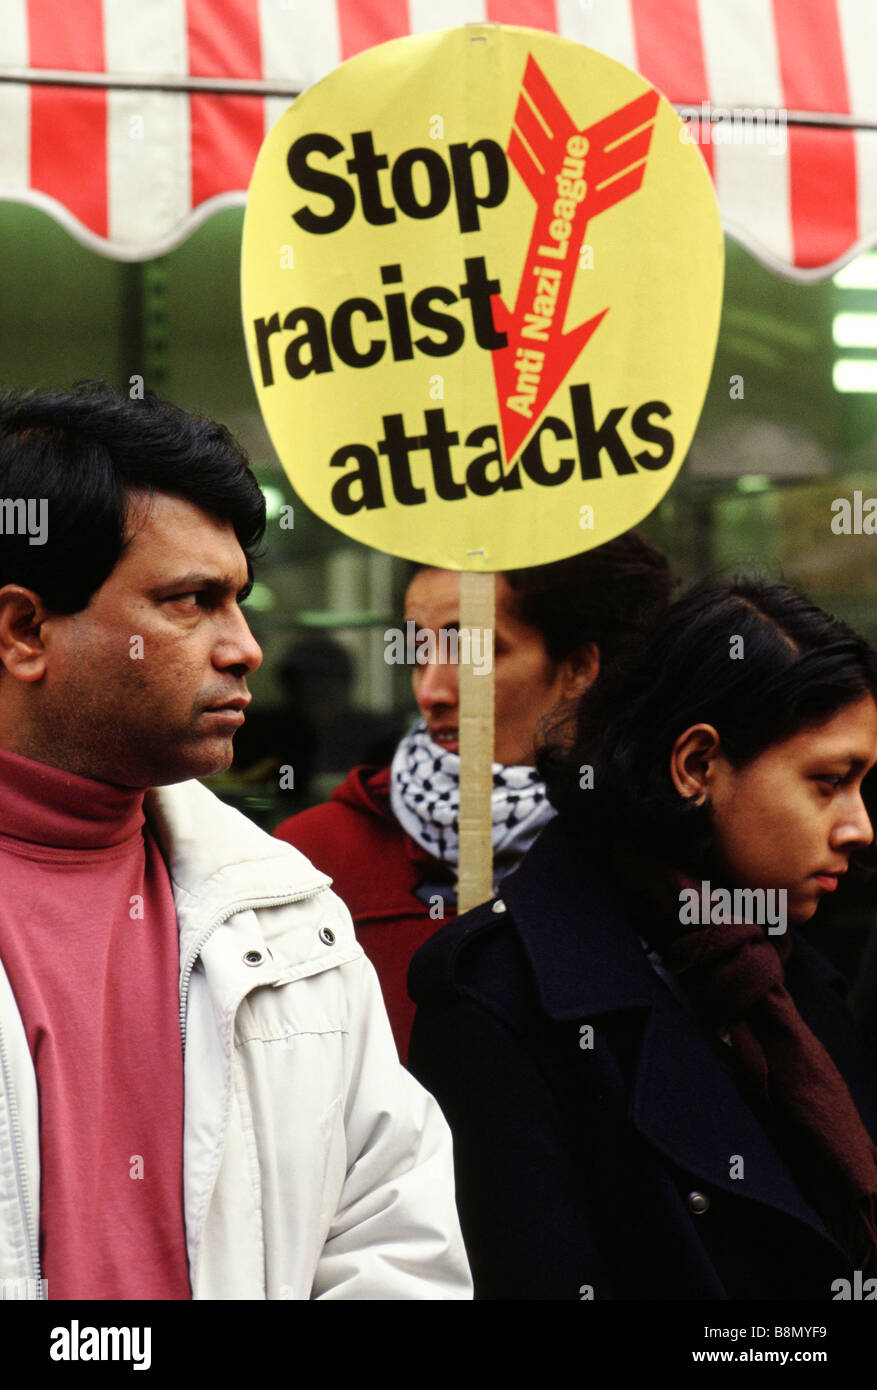 Tower Hamlets, London, UK. Members of the Anti Nazi League (ANL) protest on Brick Lane against racist attacks on the local community. Stock Photo